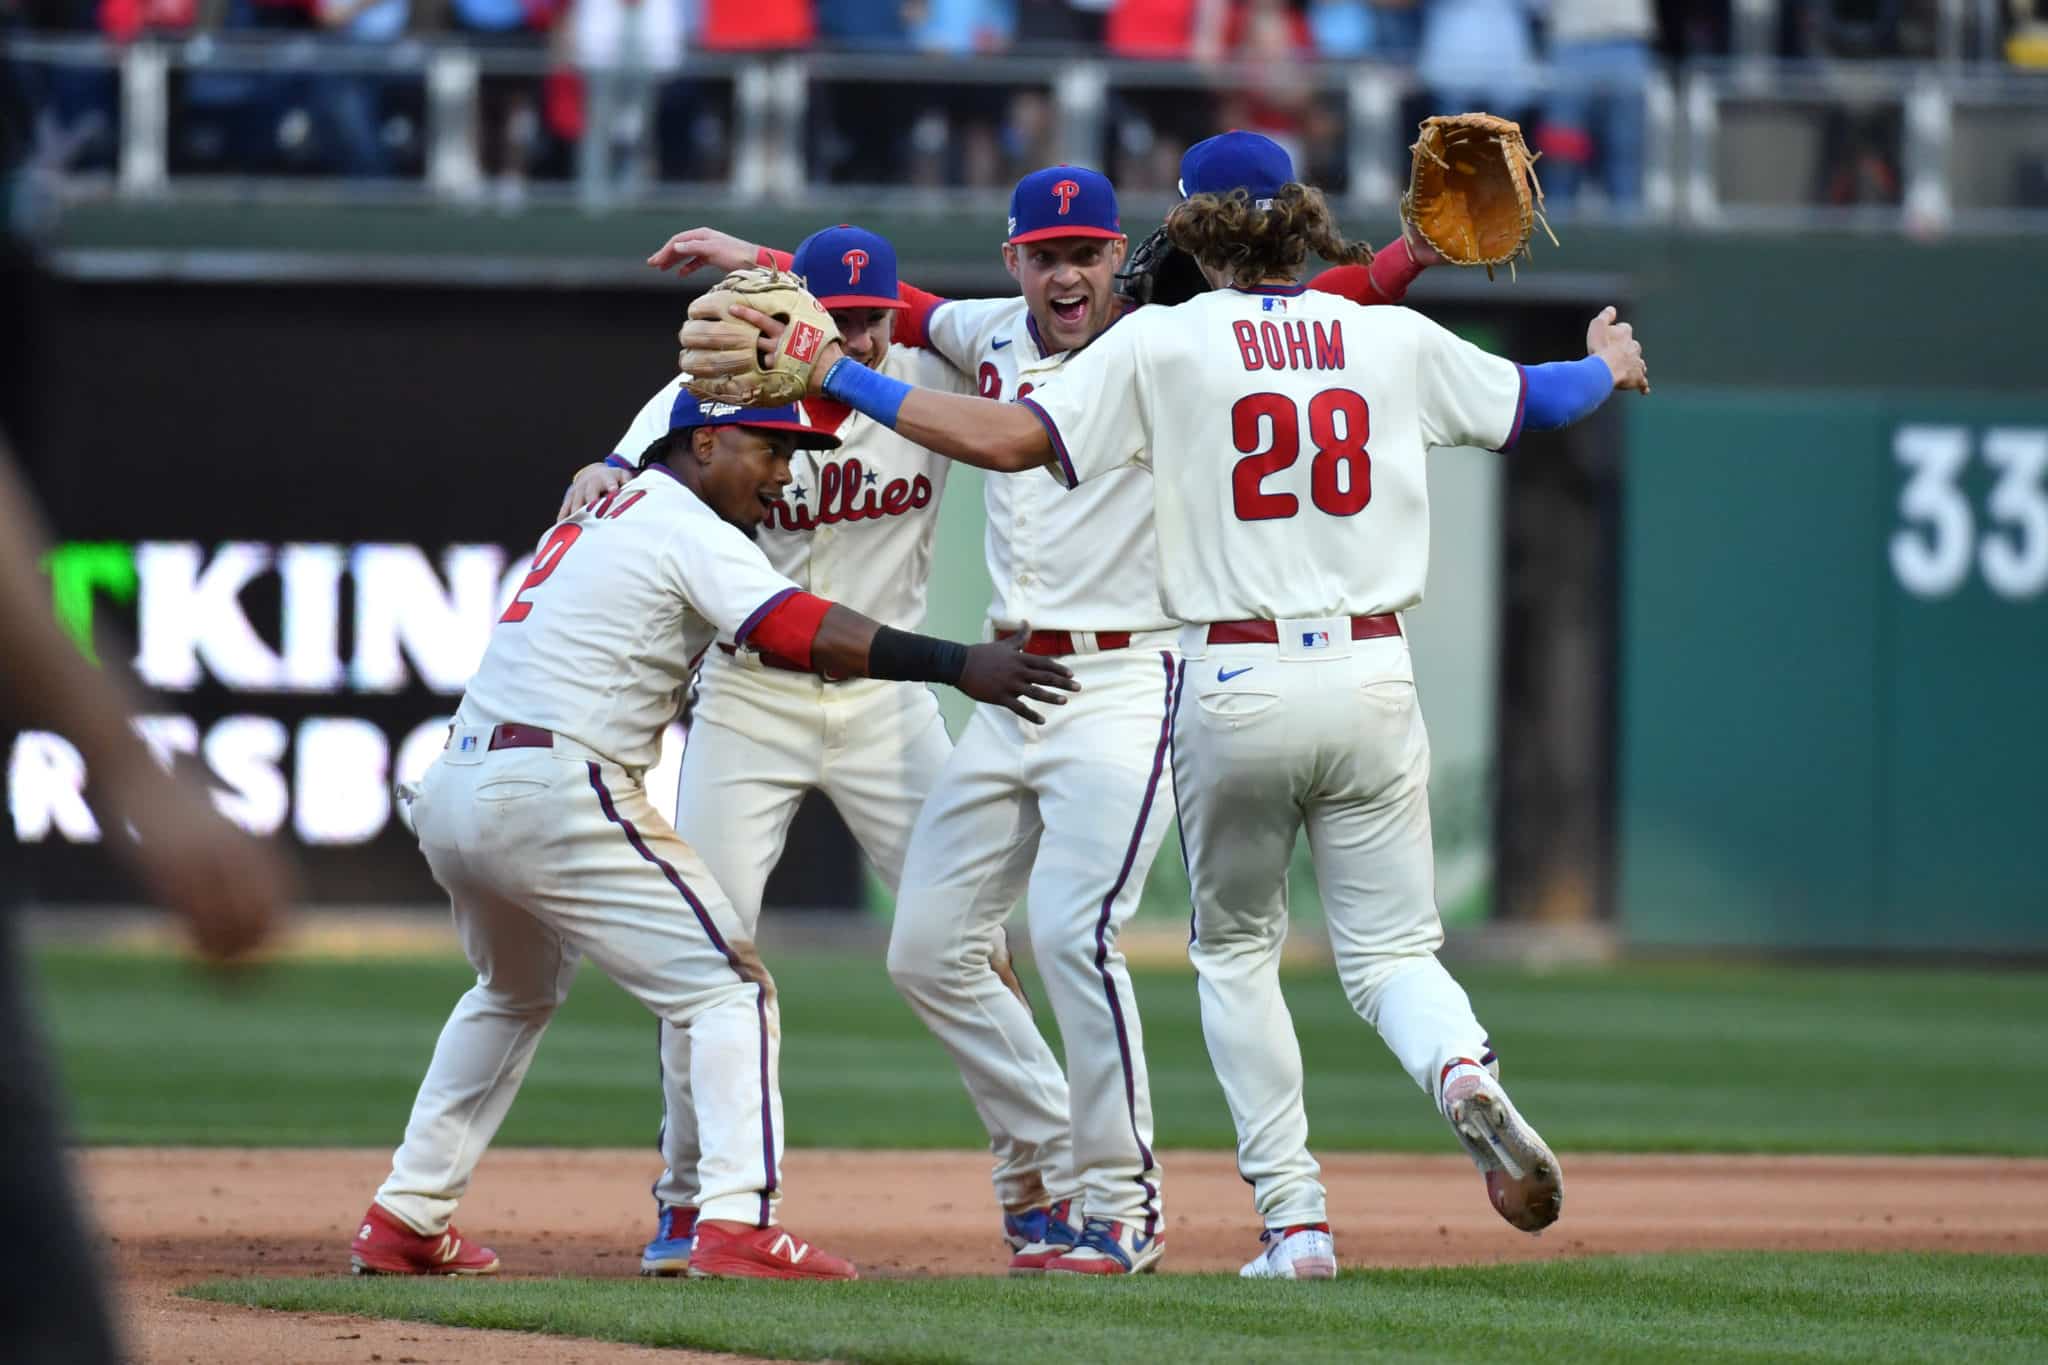 Phillies Make the Long Climb Back to the Top